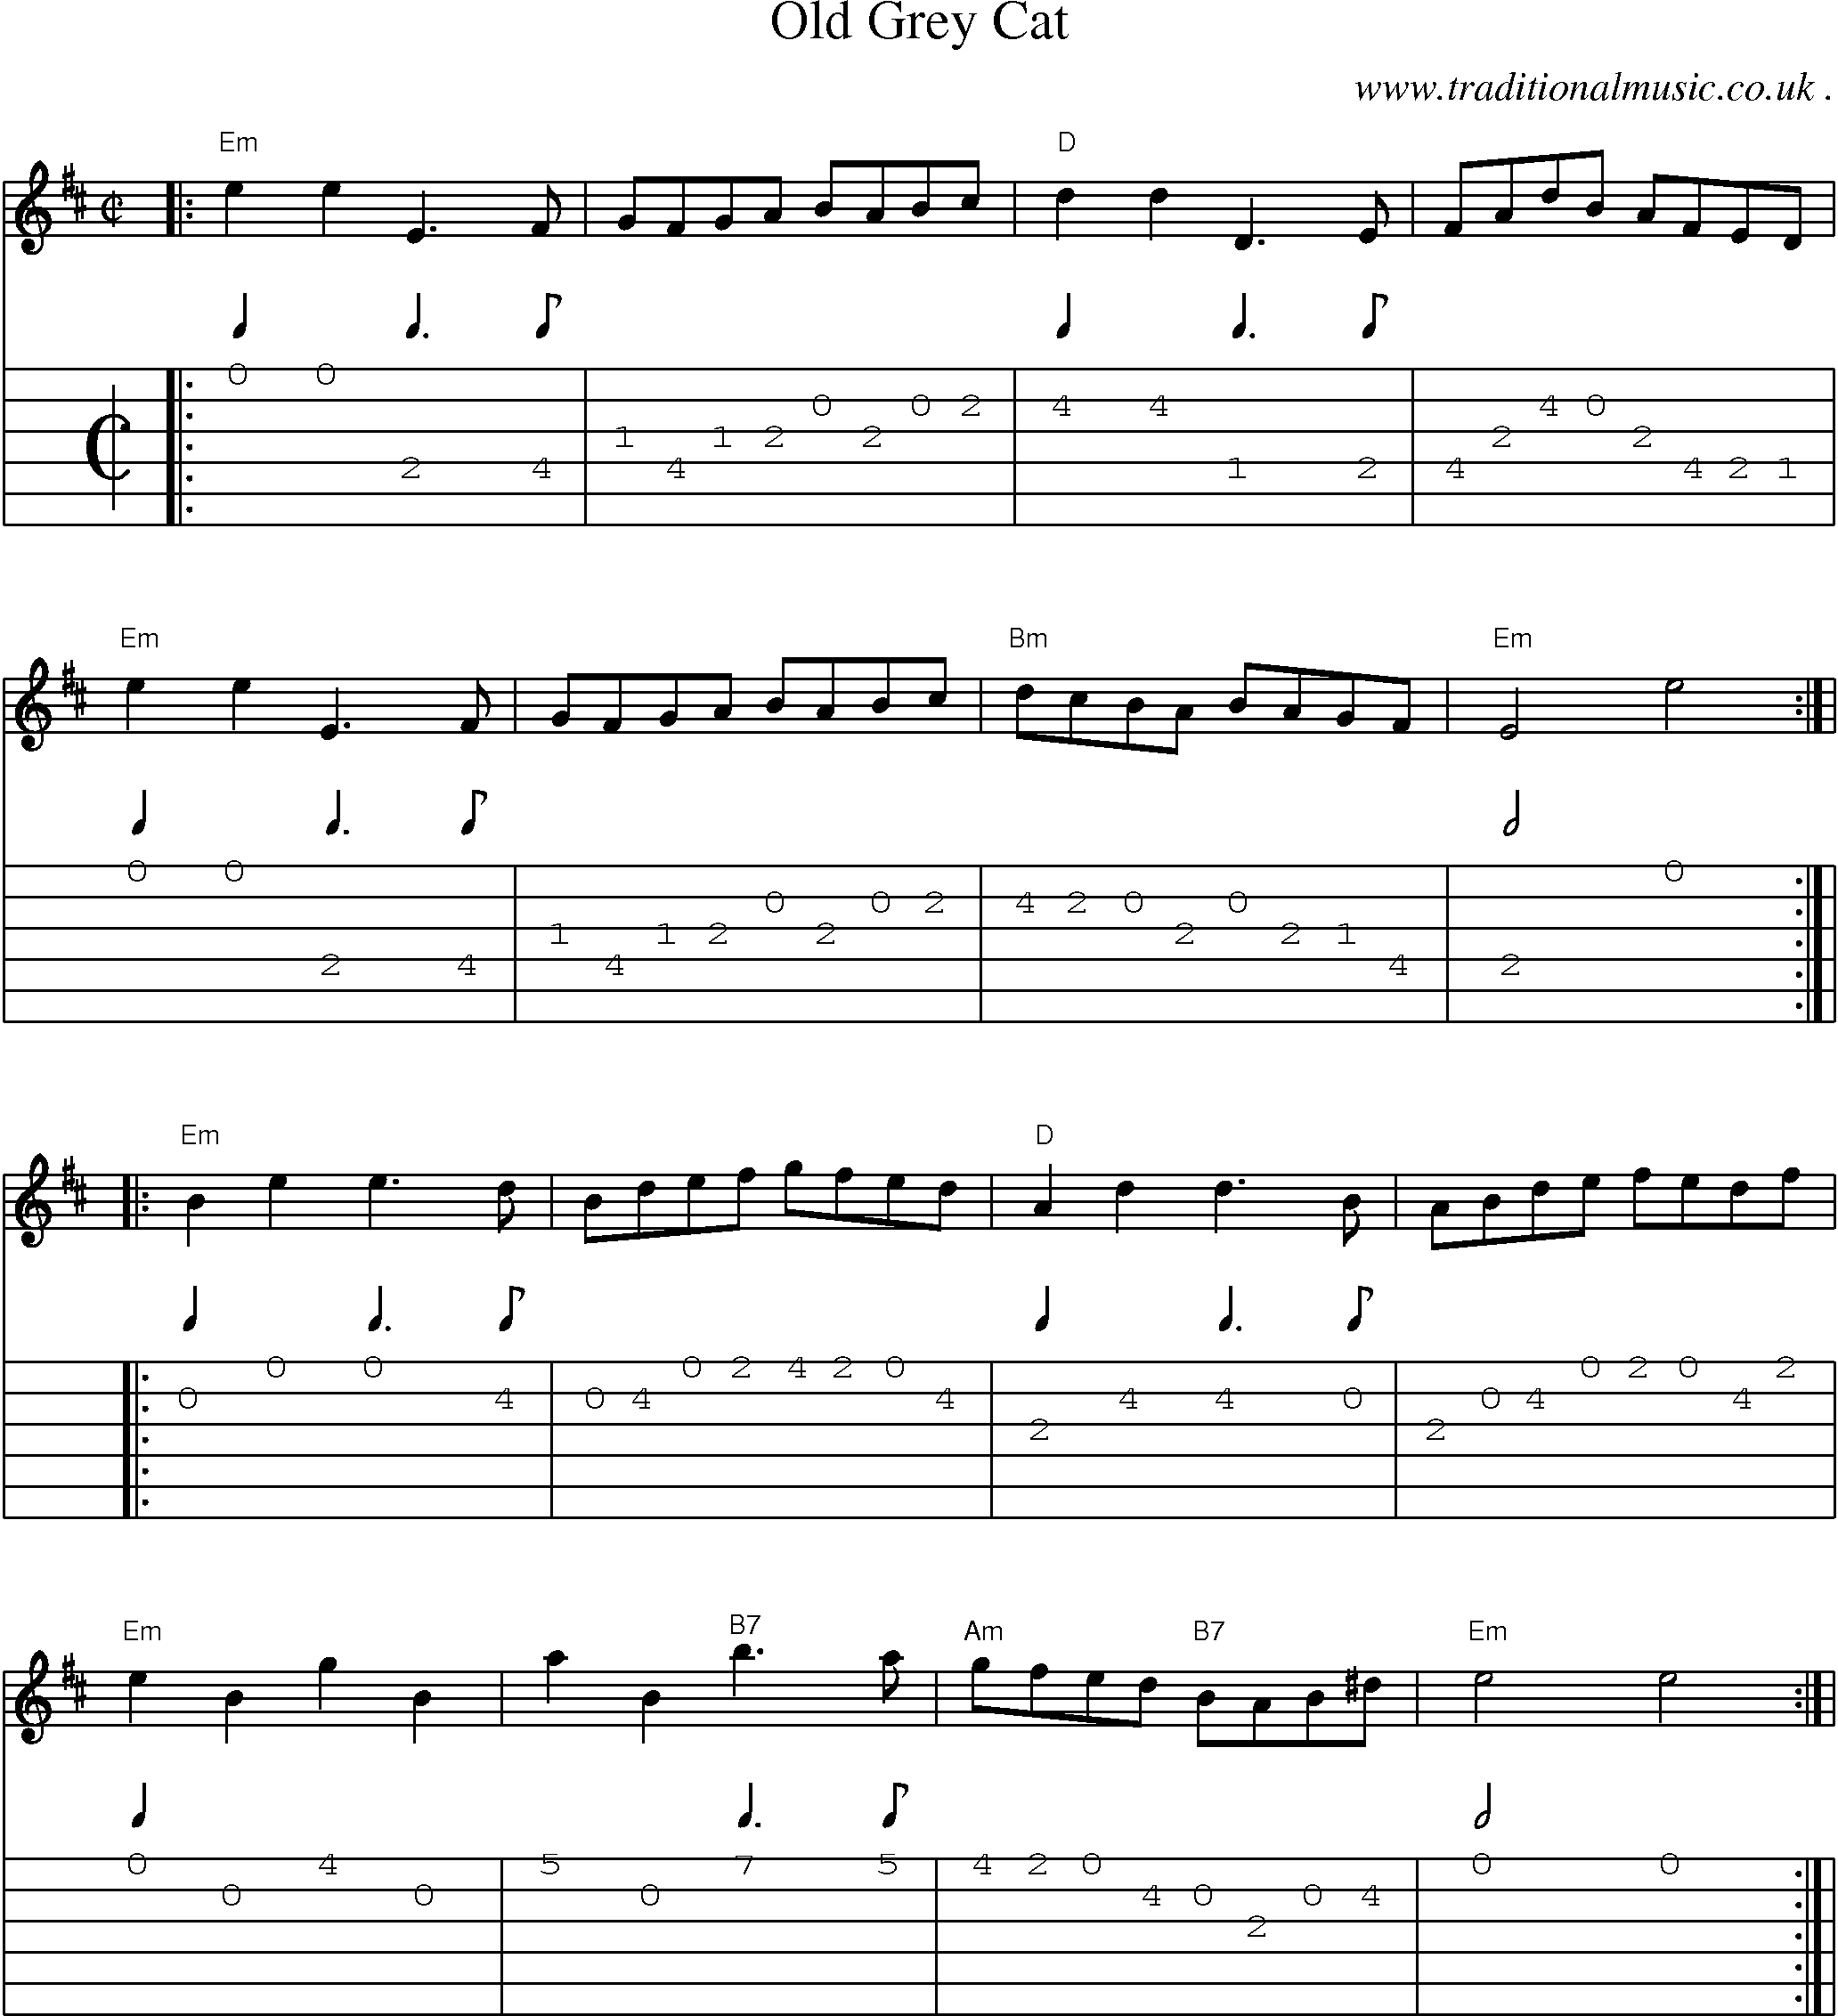 Music Score and Guitar Tabs for Old Grey Cat